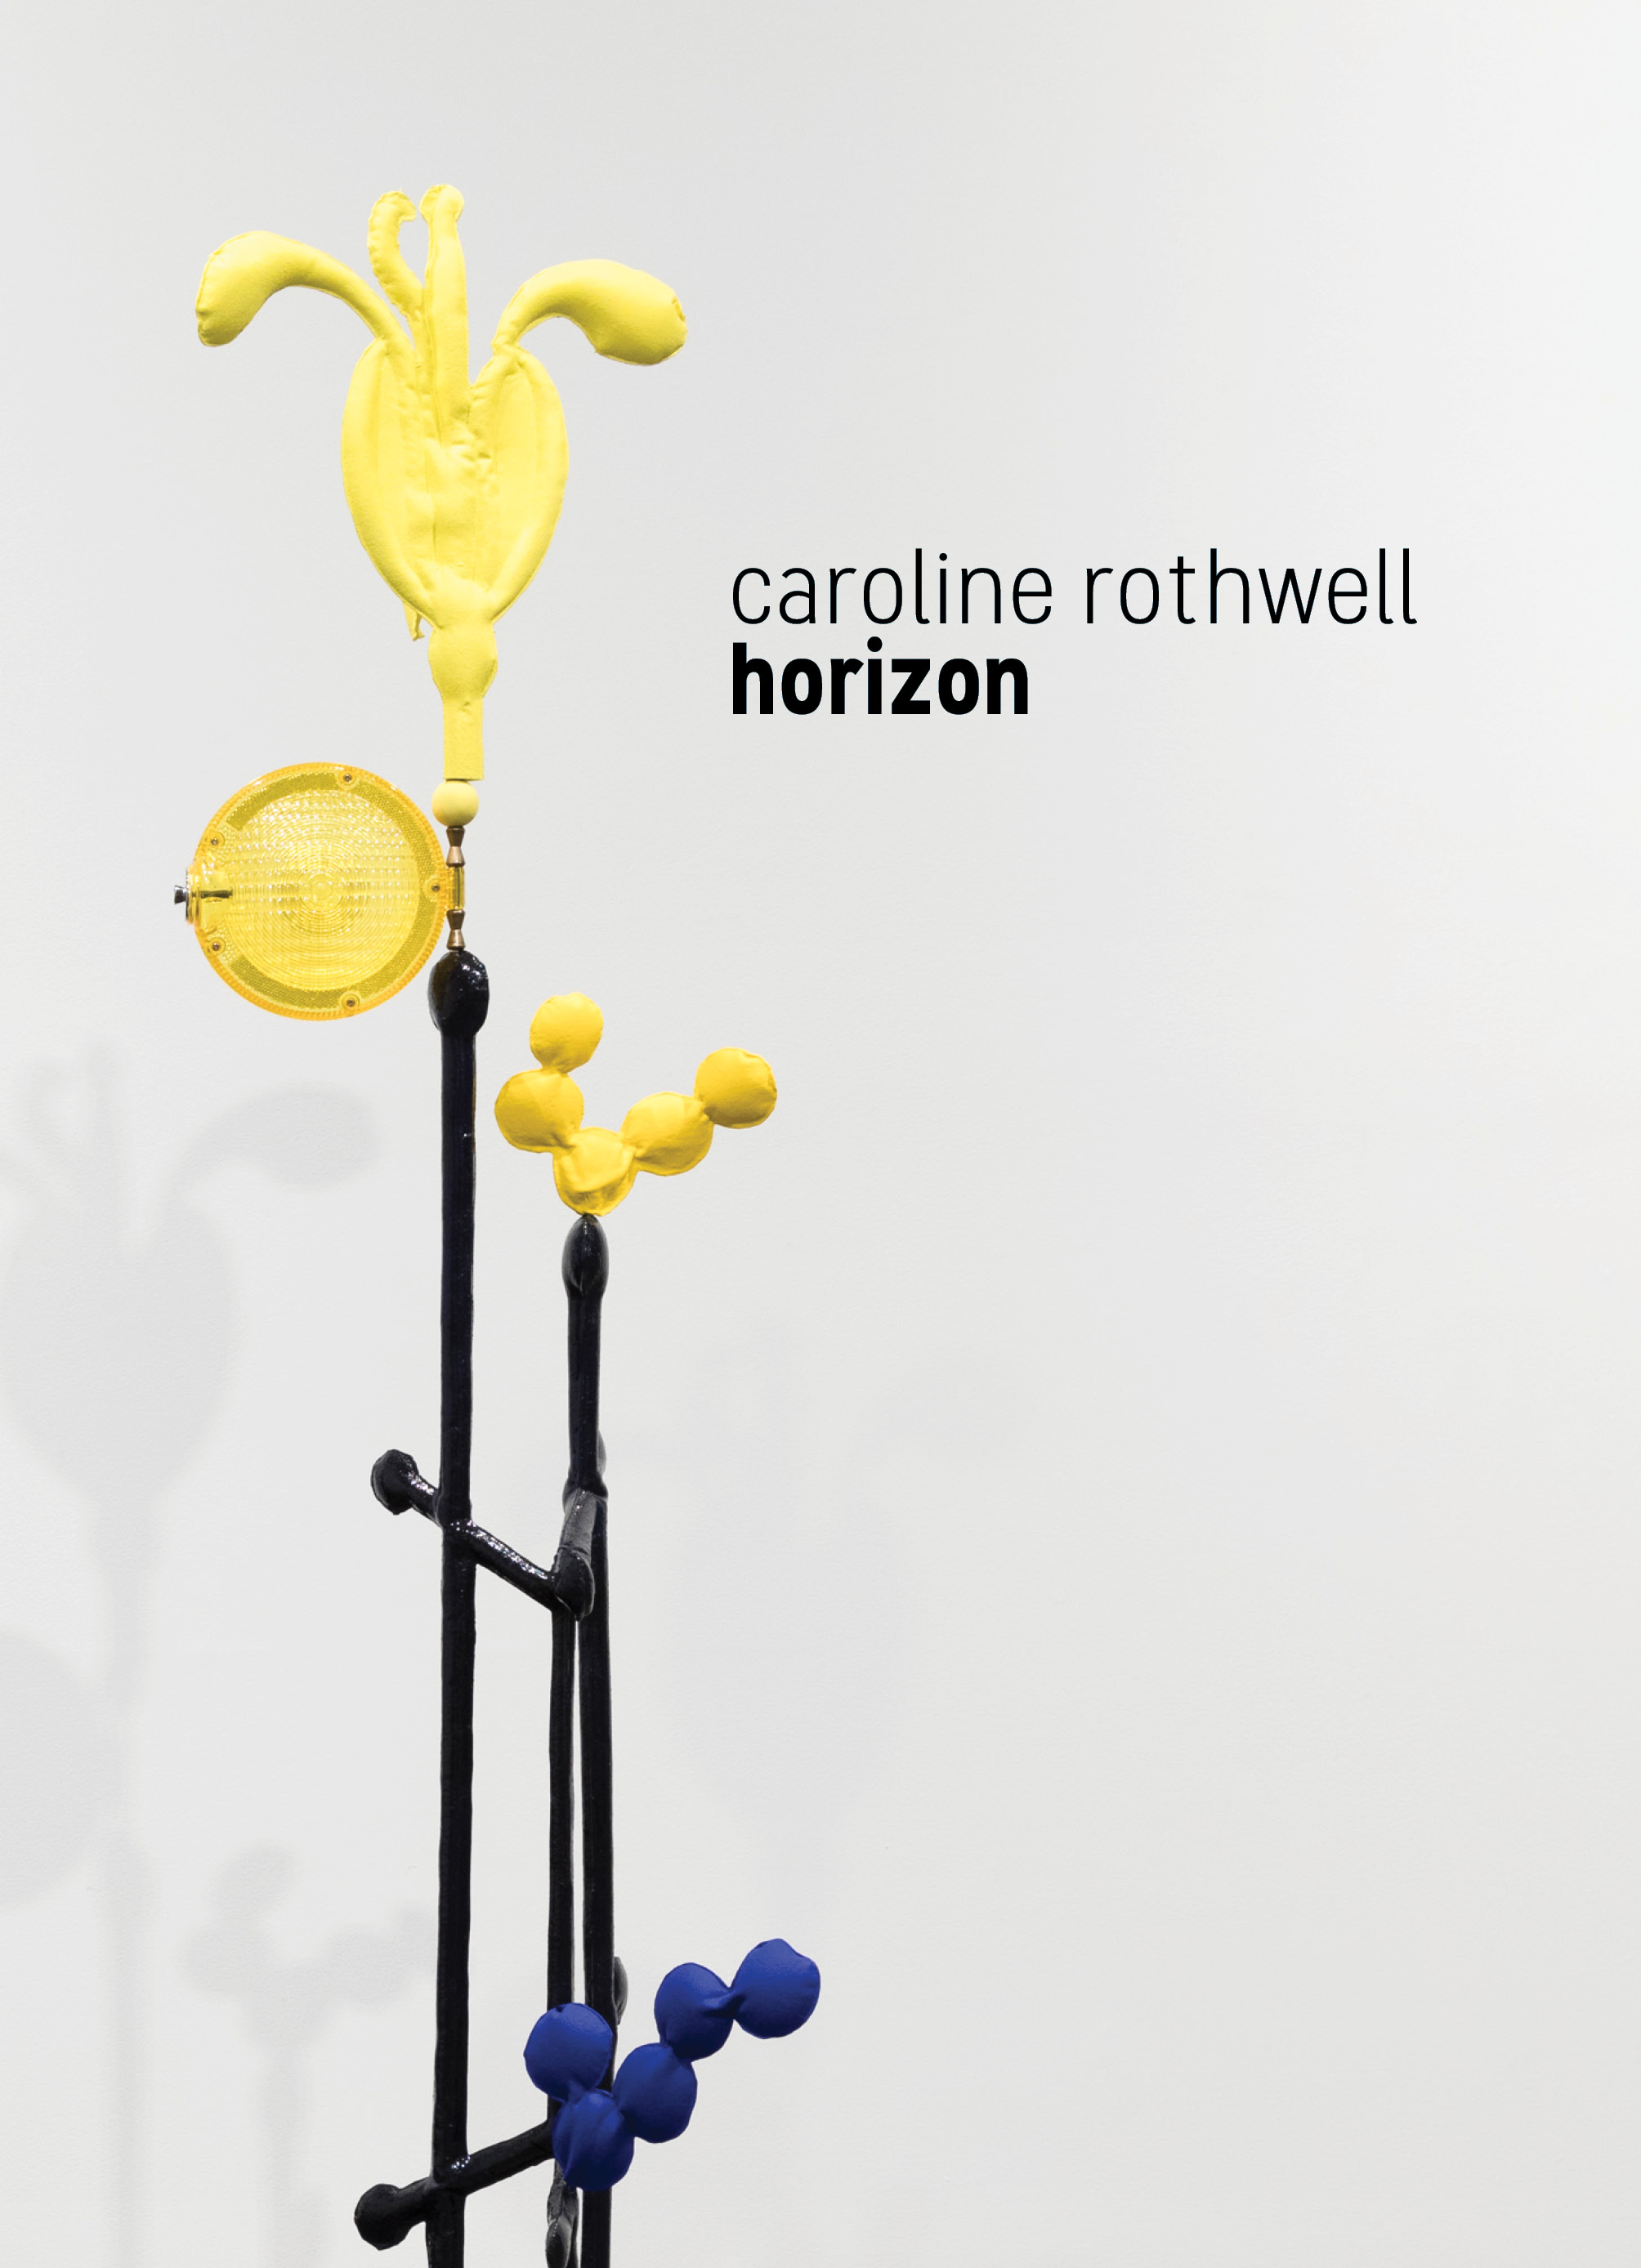 The cover of an exhibition catalogue featuring a detail of a sculpture by artist Caroline Rothwell. The sculpture features thin, upright black pipes with decorative yellow shapes at the ends and they look a bit like flowers, coming from one of the black posts is a grouping of small blue spheres that give the impression of a leaf. The exhibition title 